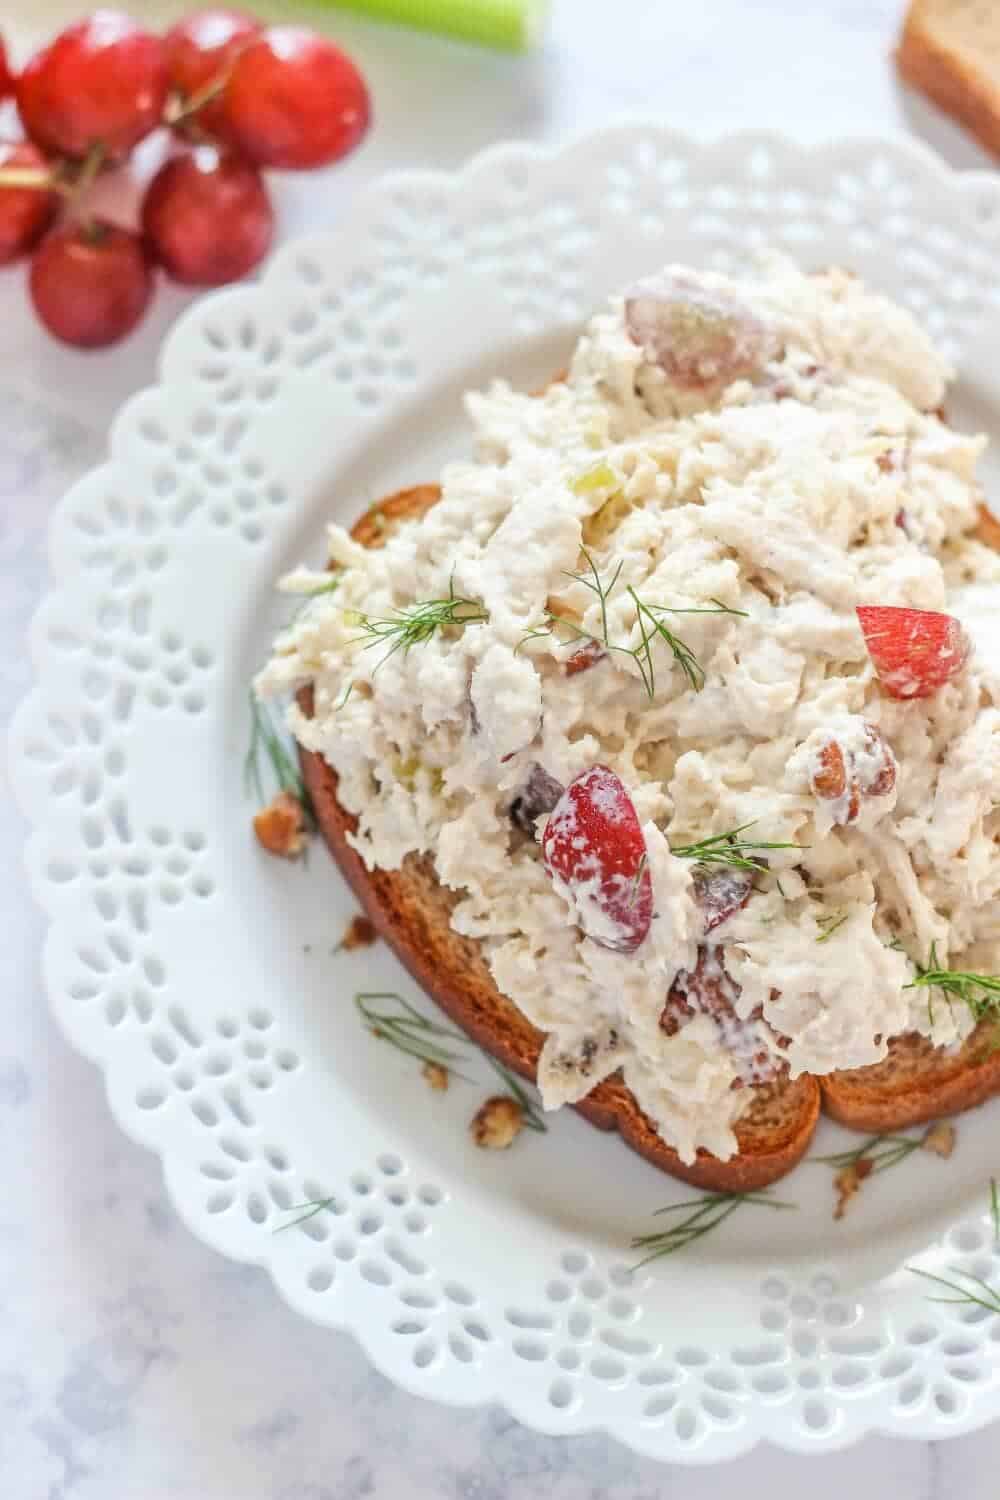 Shredded chicken salad on a piece of bread topped with fresh dill.